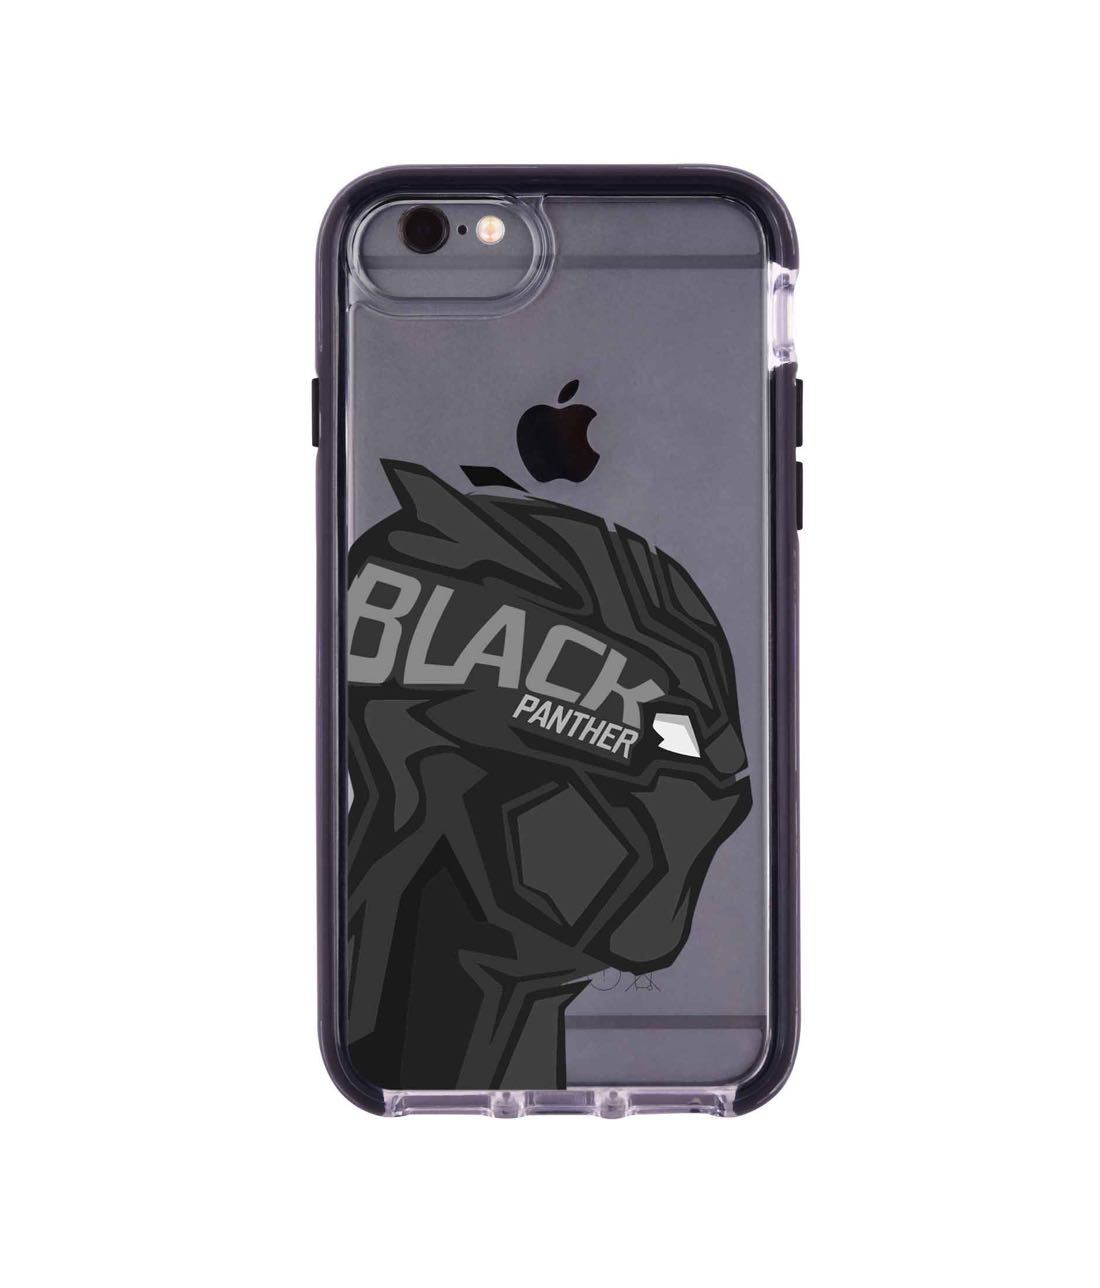 Black Panther Art - Extreme Phone Case for iPhone 6S